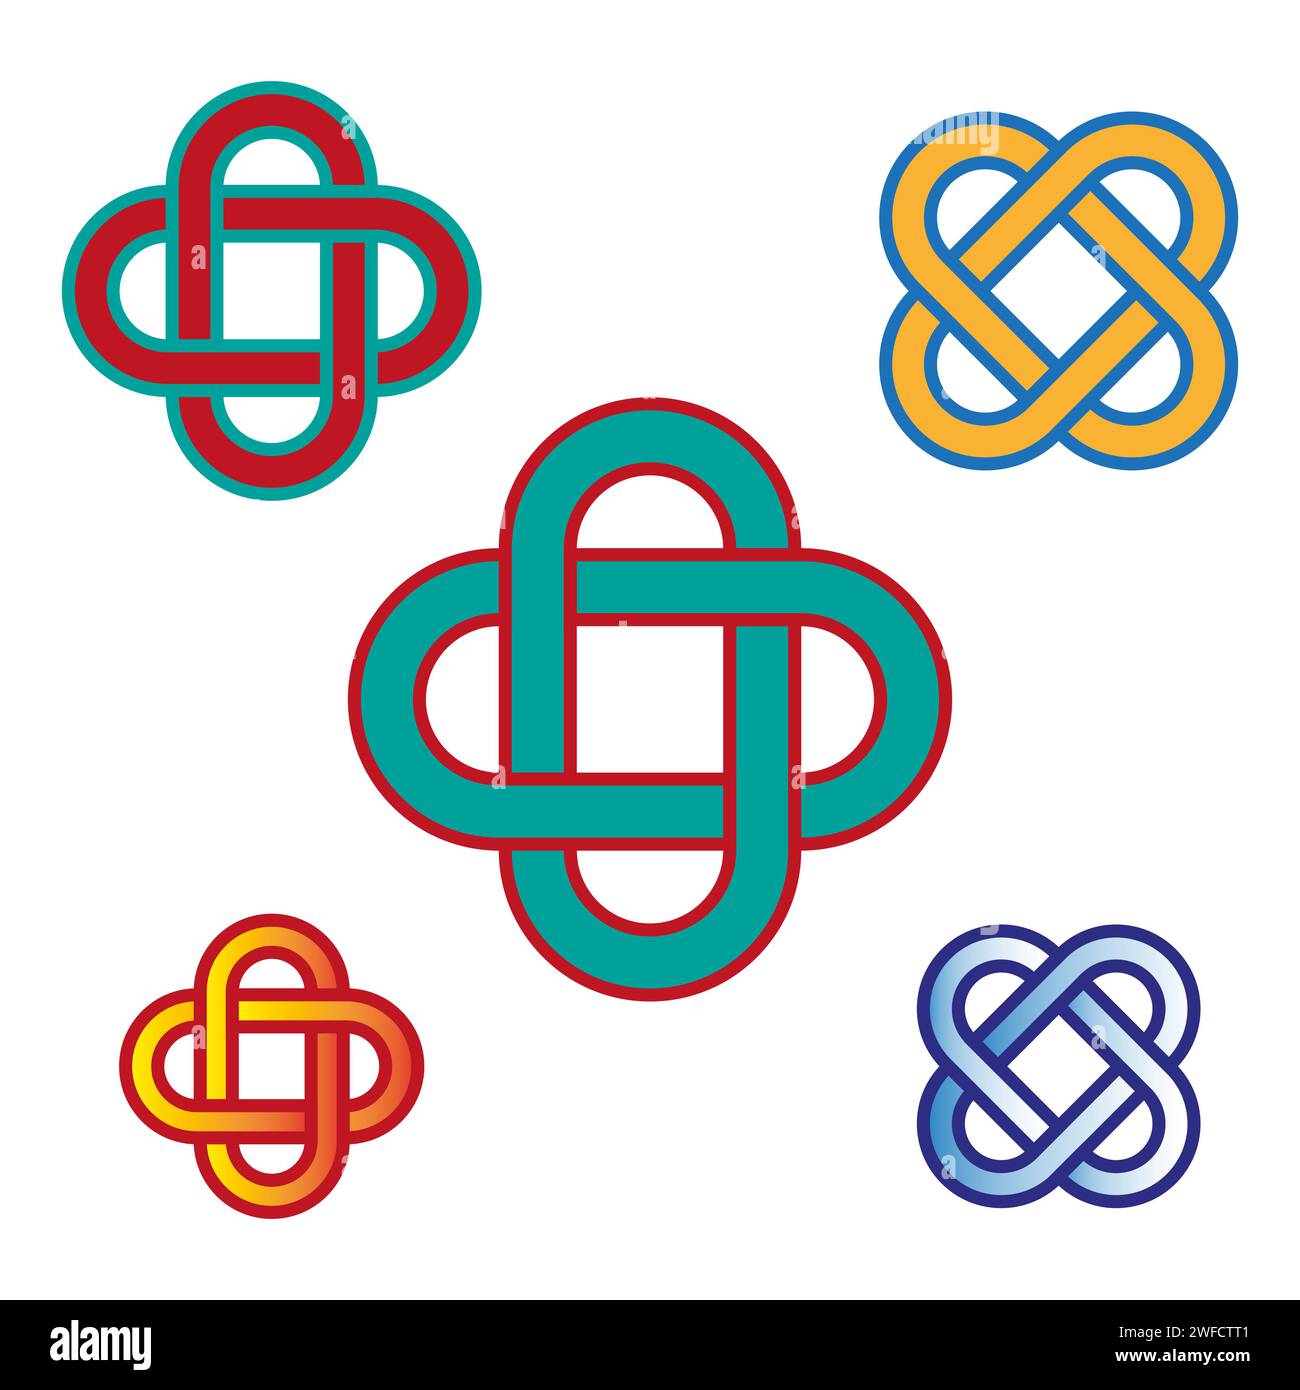 Celt square in abstract style. Design element. Geometric art. Vector illustration. stock image. EPS 10. Stock Vector